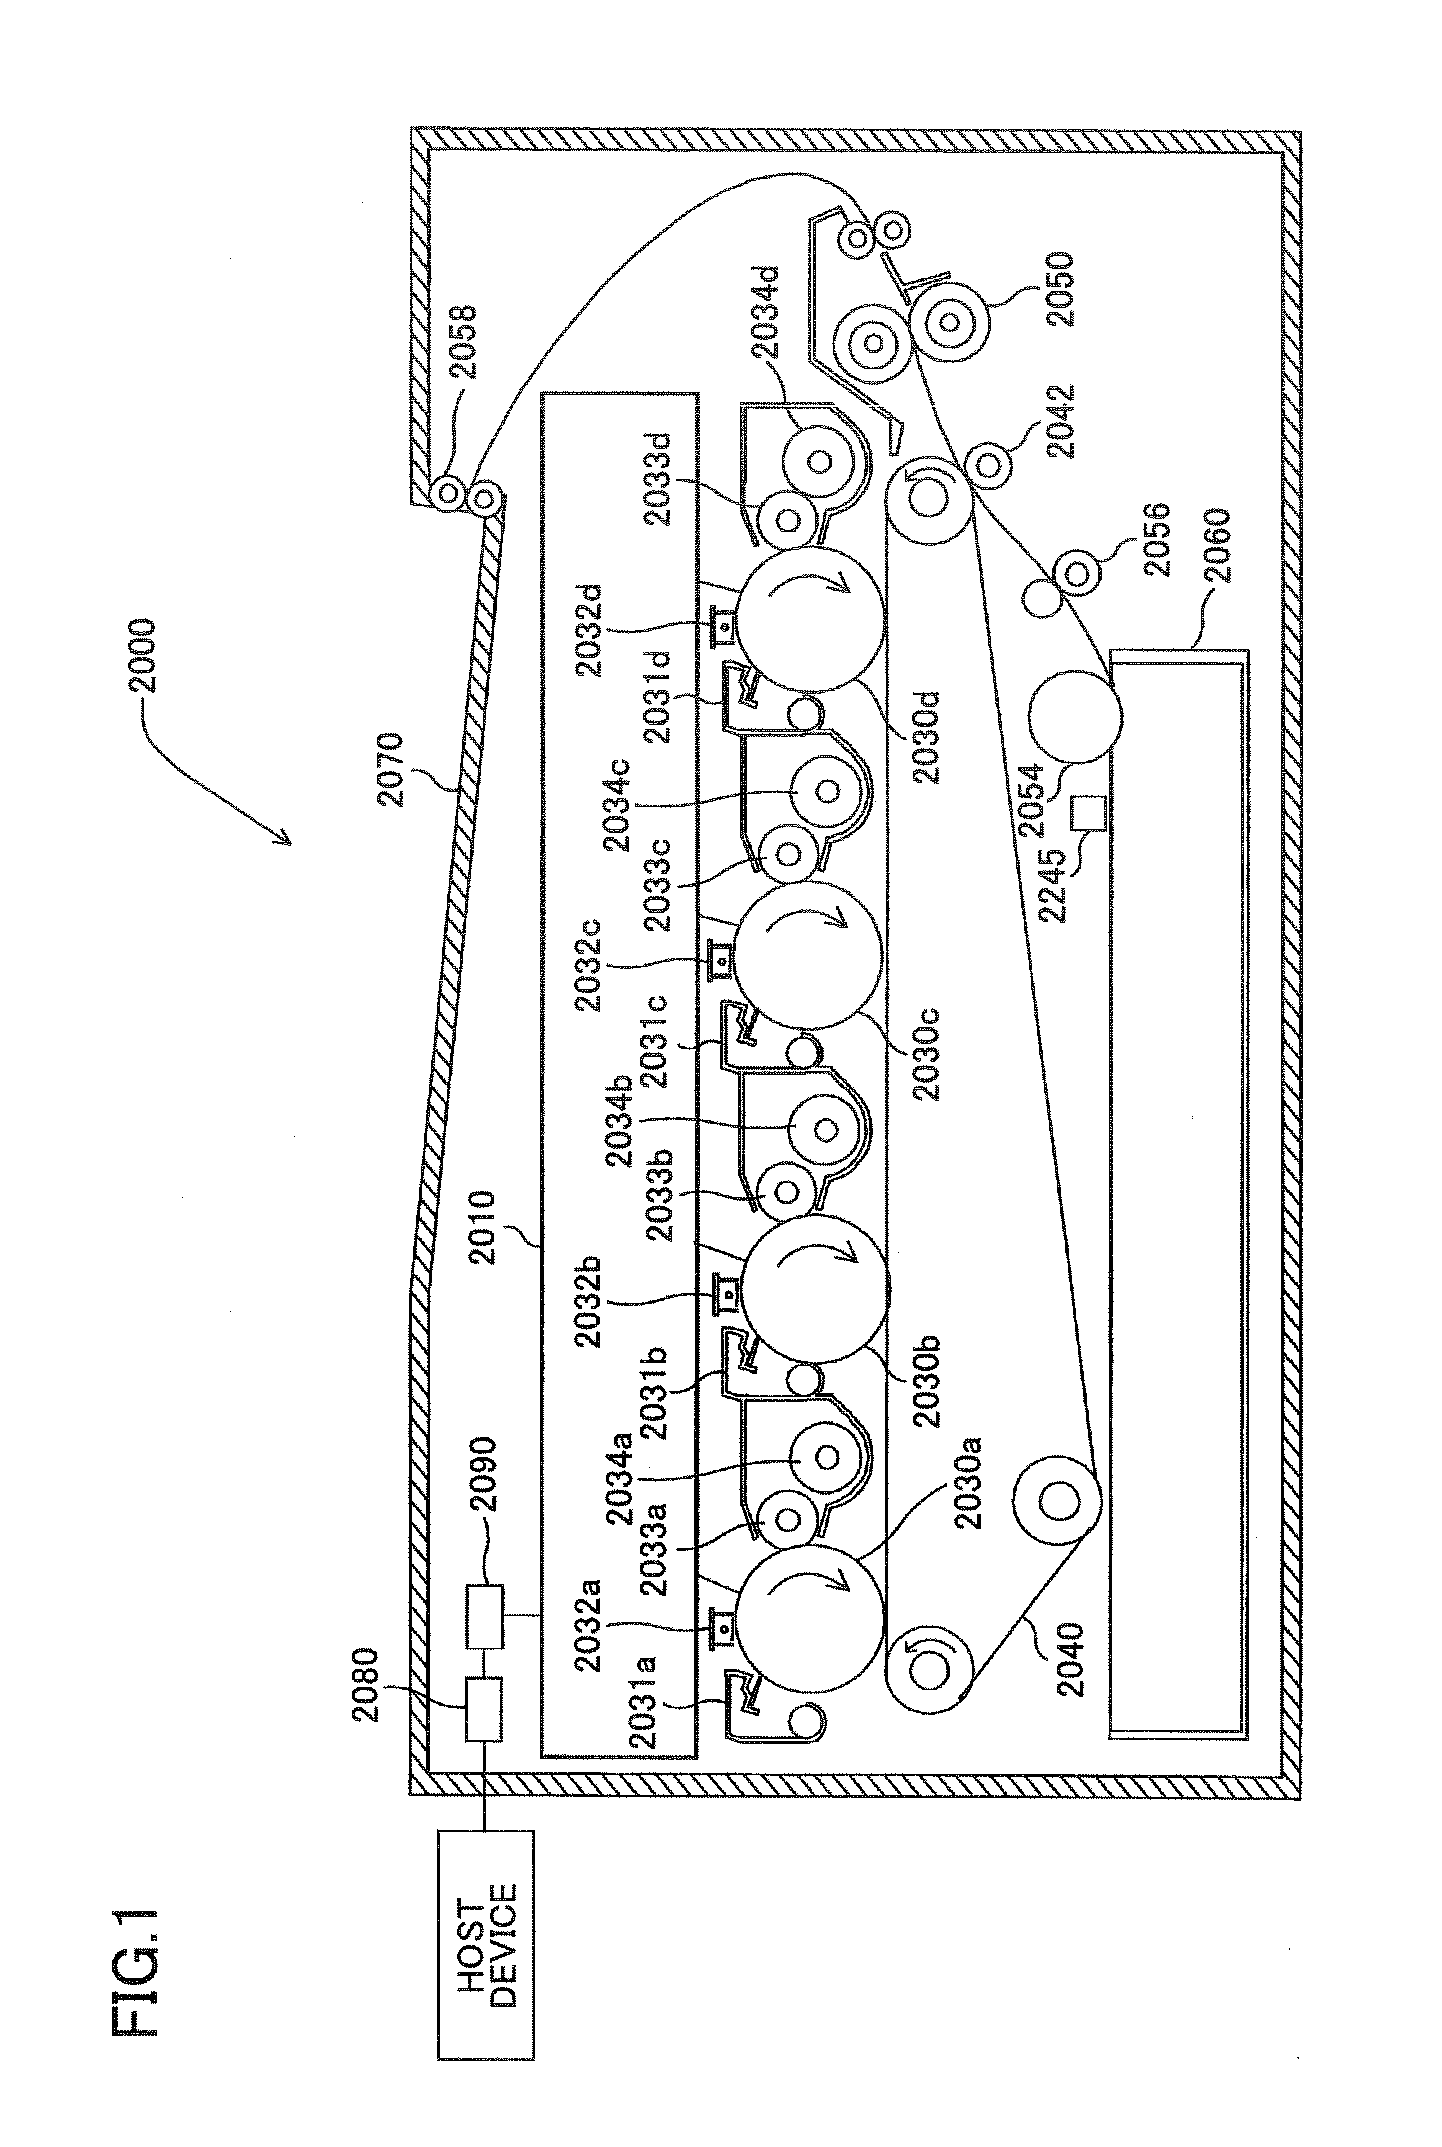 Optical sensor and image forming device